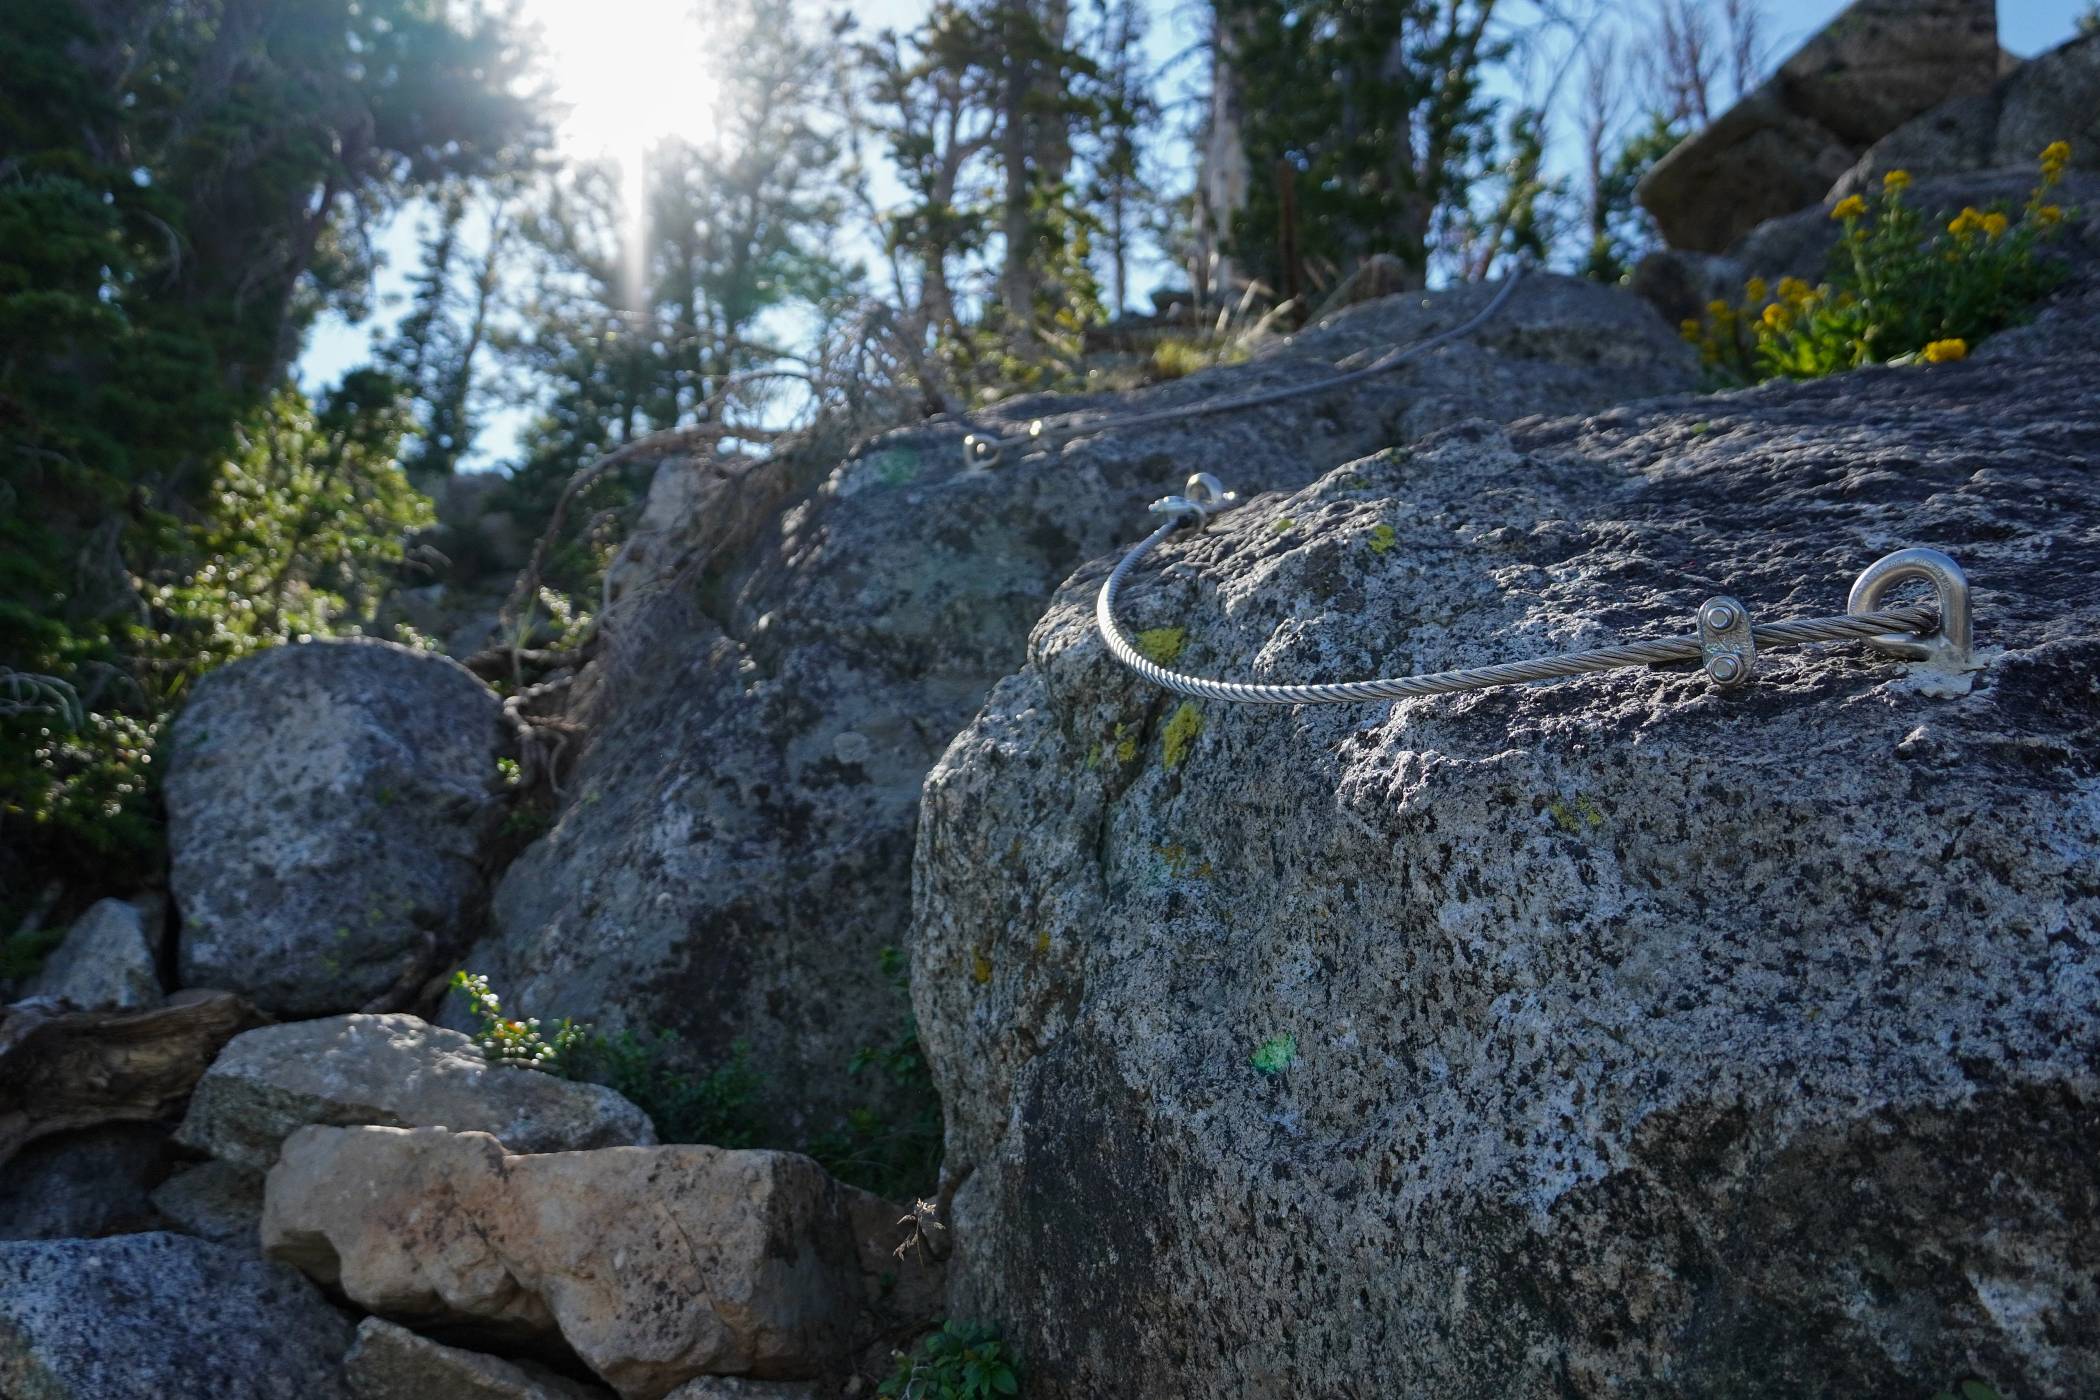 Metal wires along rock on Holey Moley